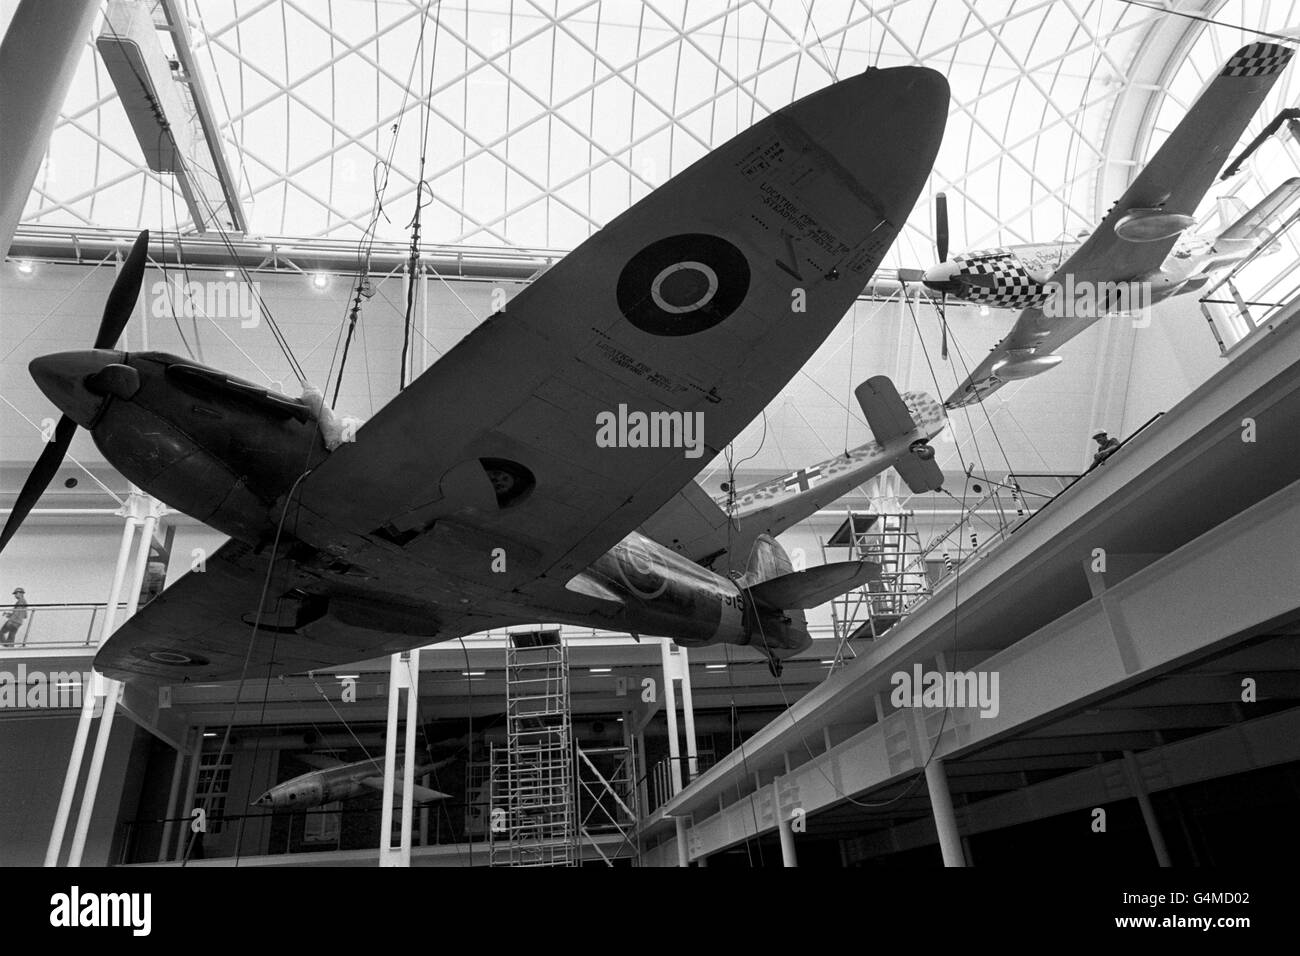 The Imperial War Museum's Battle of Britain Spitfire is suspended 50 feet up in the new main exhibit hall in London. It is the centrepiece of the new display after major redevelopment work of the museum. Behind is an American P51 Mustang (r) and a German Focke Wulf 190 Stock Photo